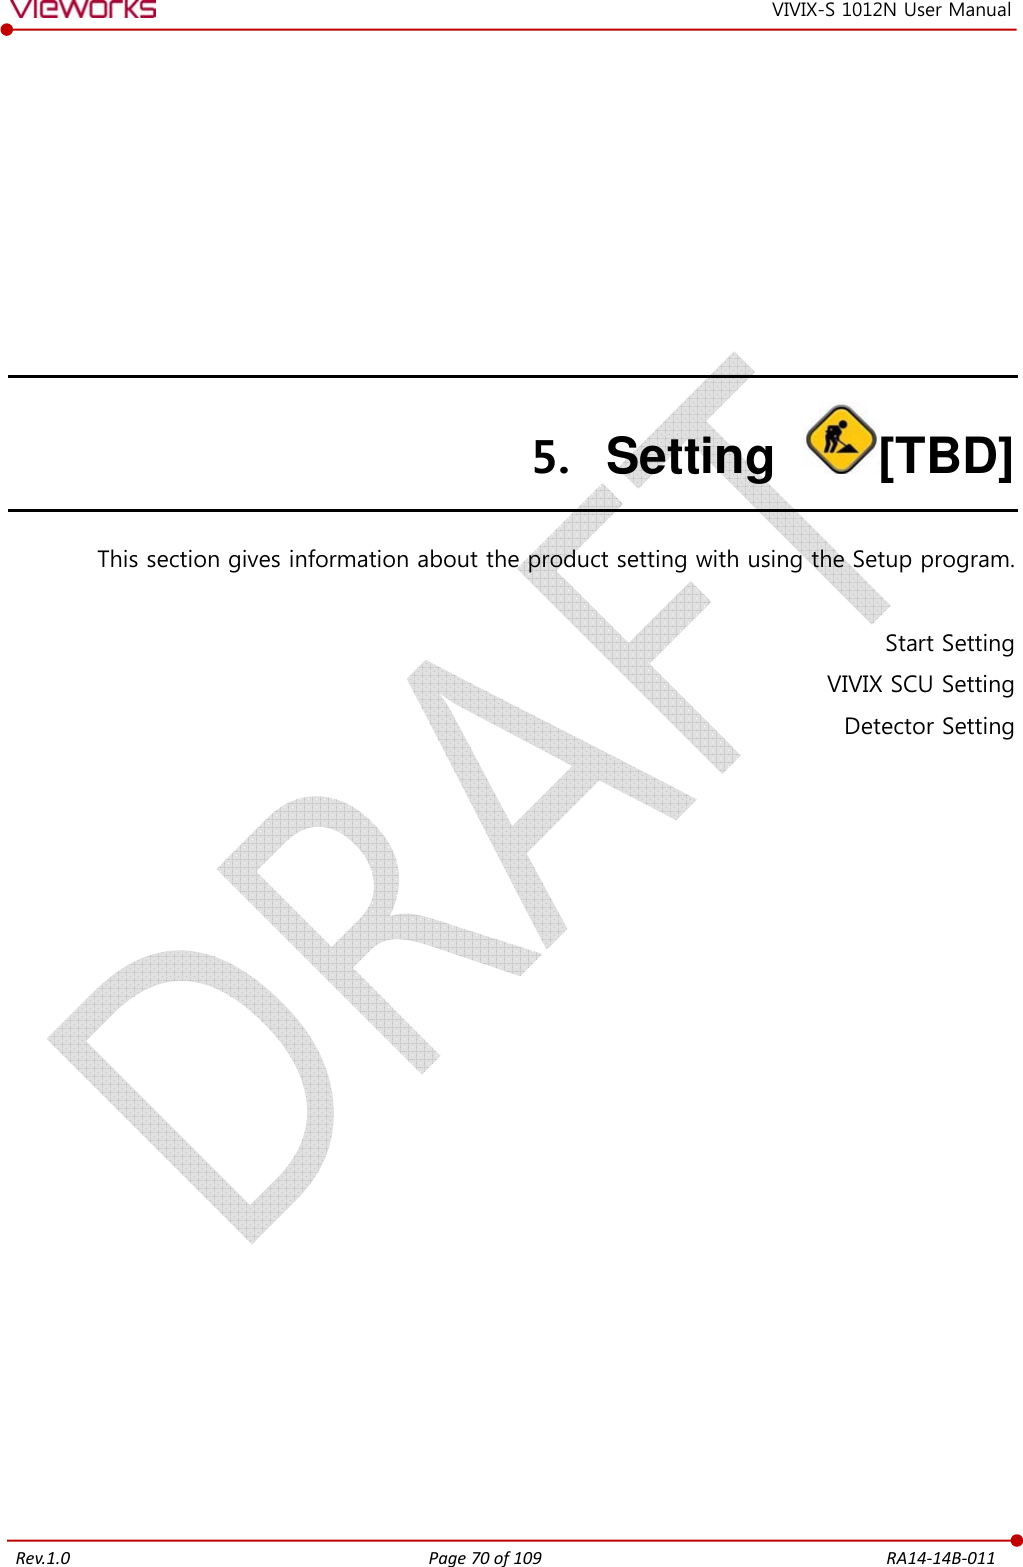   Rev.1.0 Page 70 of 109  RA14-14B-011 VIVIX-S 1012N User Manual 5. Setting  [TBD] This section gives information about the product setting with using the Setup program.  Start Setting VIVIX SCU Setting Detector Setting    